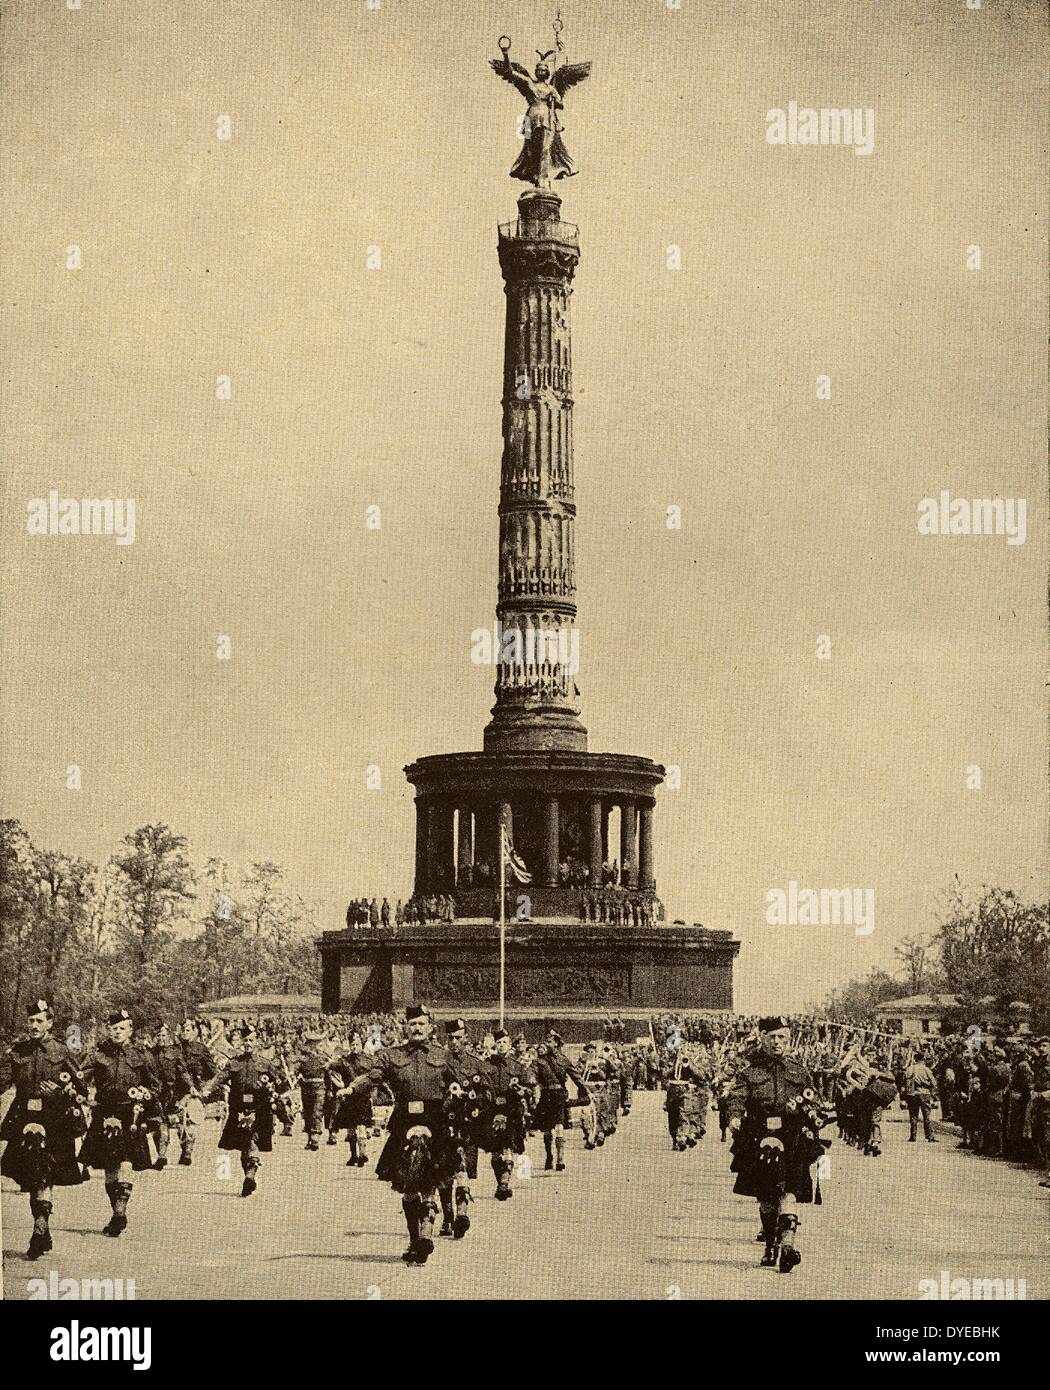 Scottish (British) troops parade near the Siegessäule monument in Berlin, Germany. Designed by Heinrich Strack after 1864 to commemorate the Prussian victory in the Danish-Prussian war Stock Photo